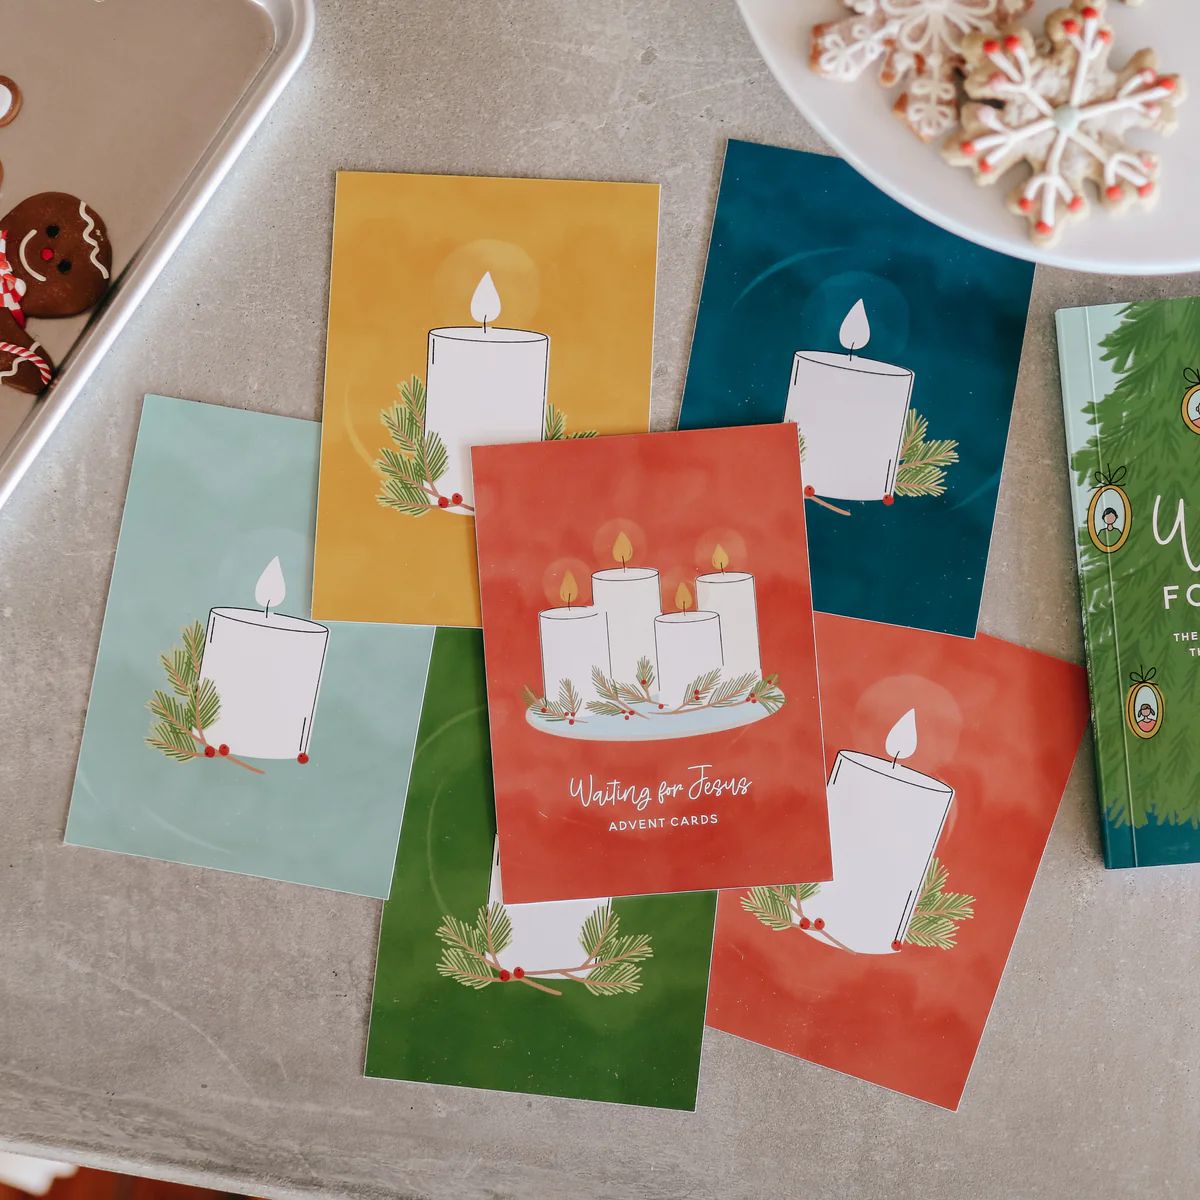 Waiting for Jesus Advent Candle Cards | The Daily Grace Co.